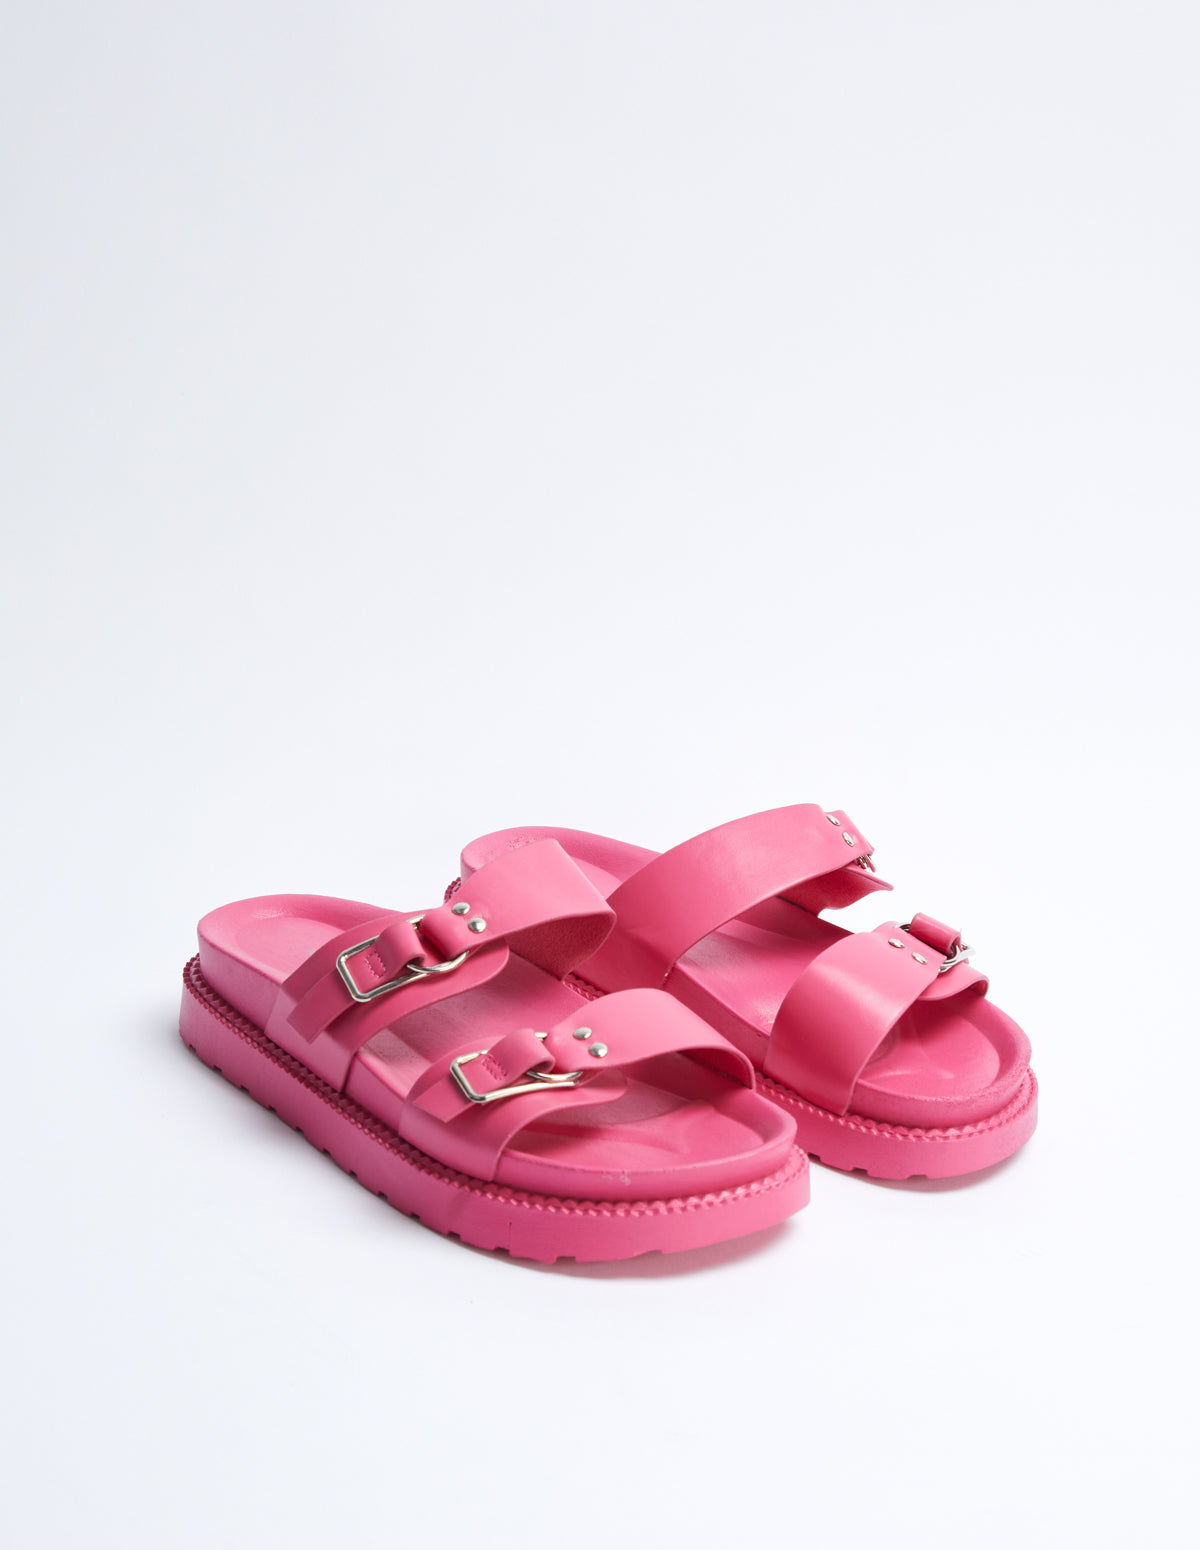 Two Strap Buckle Sandals - May